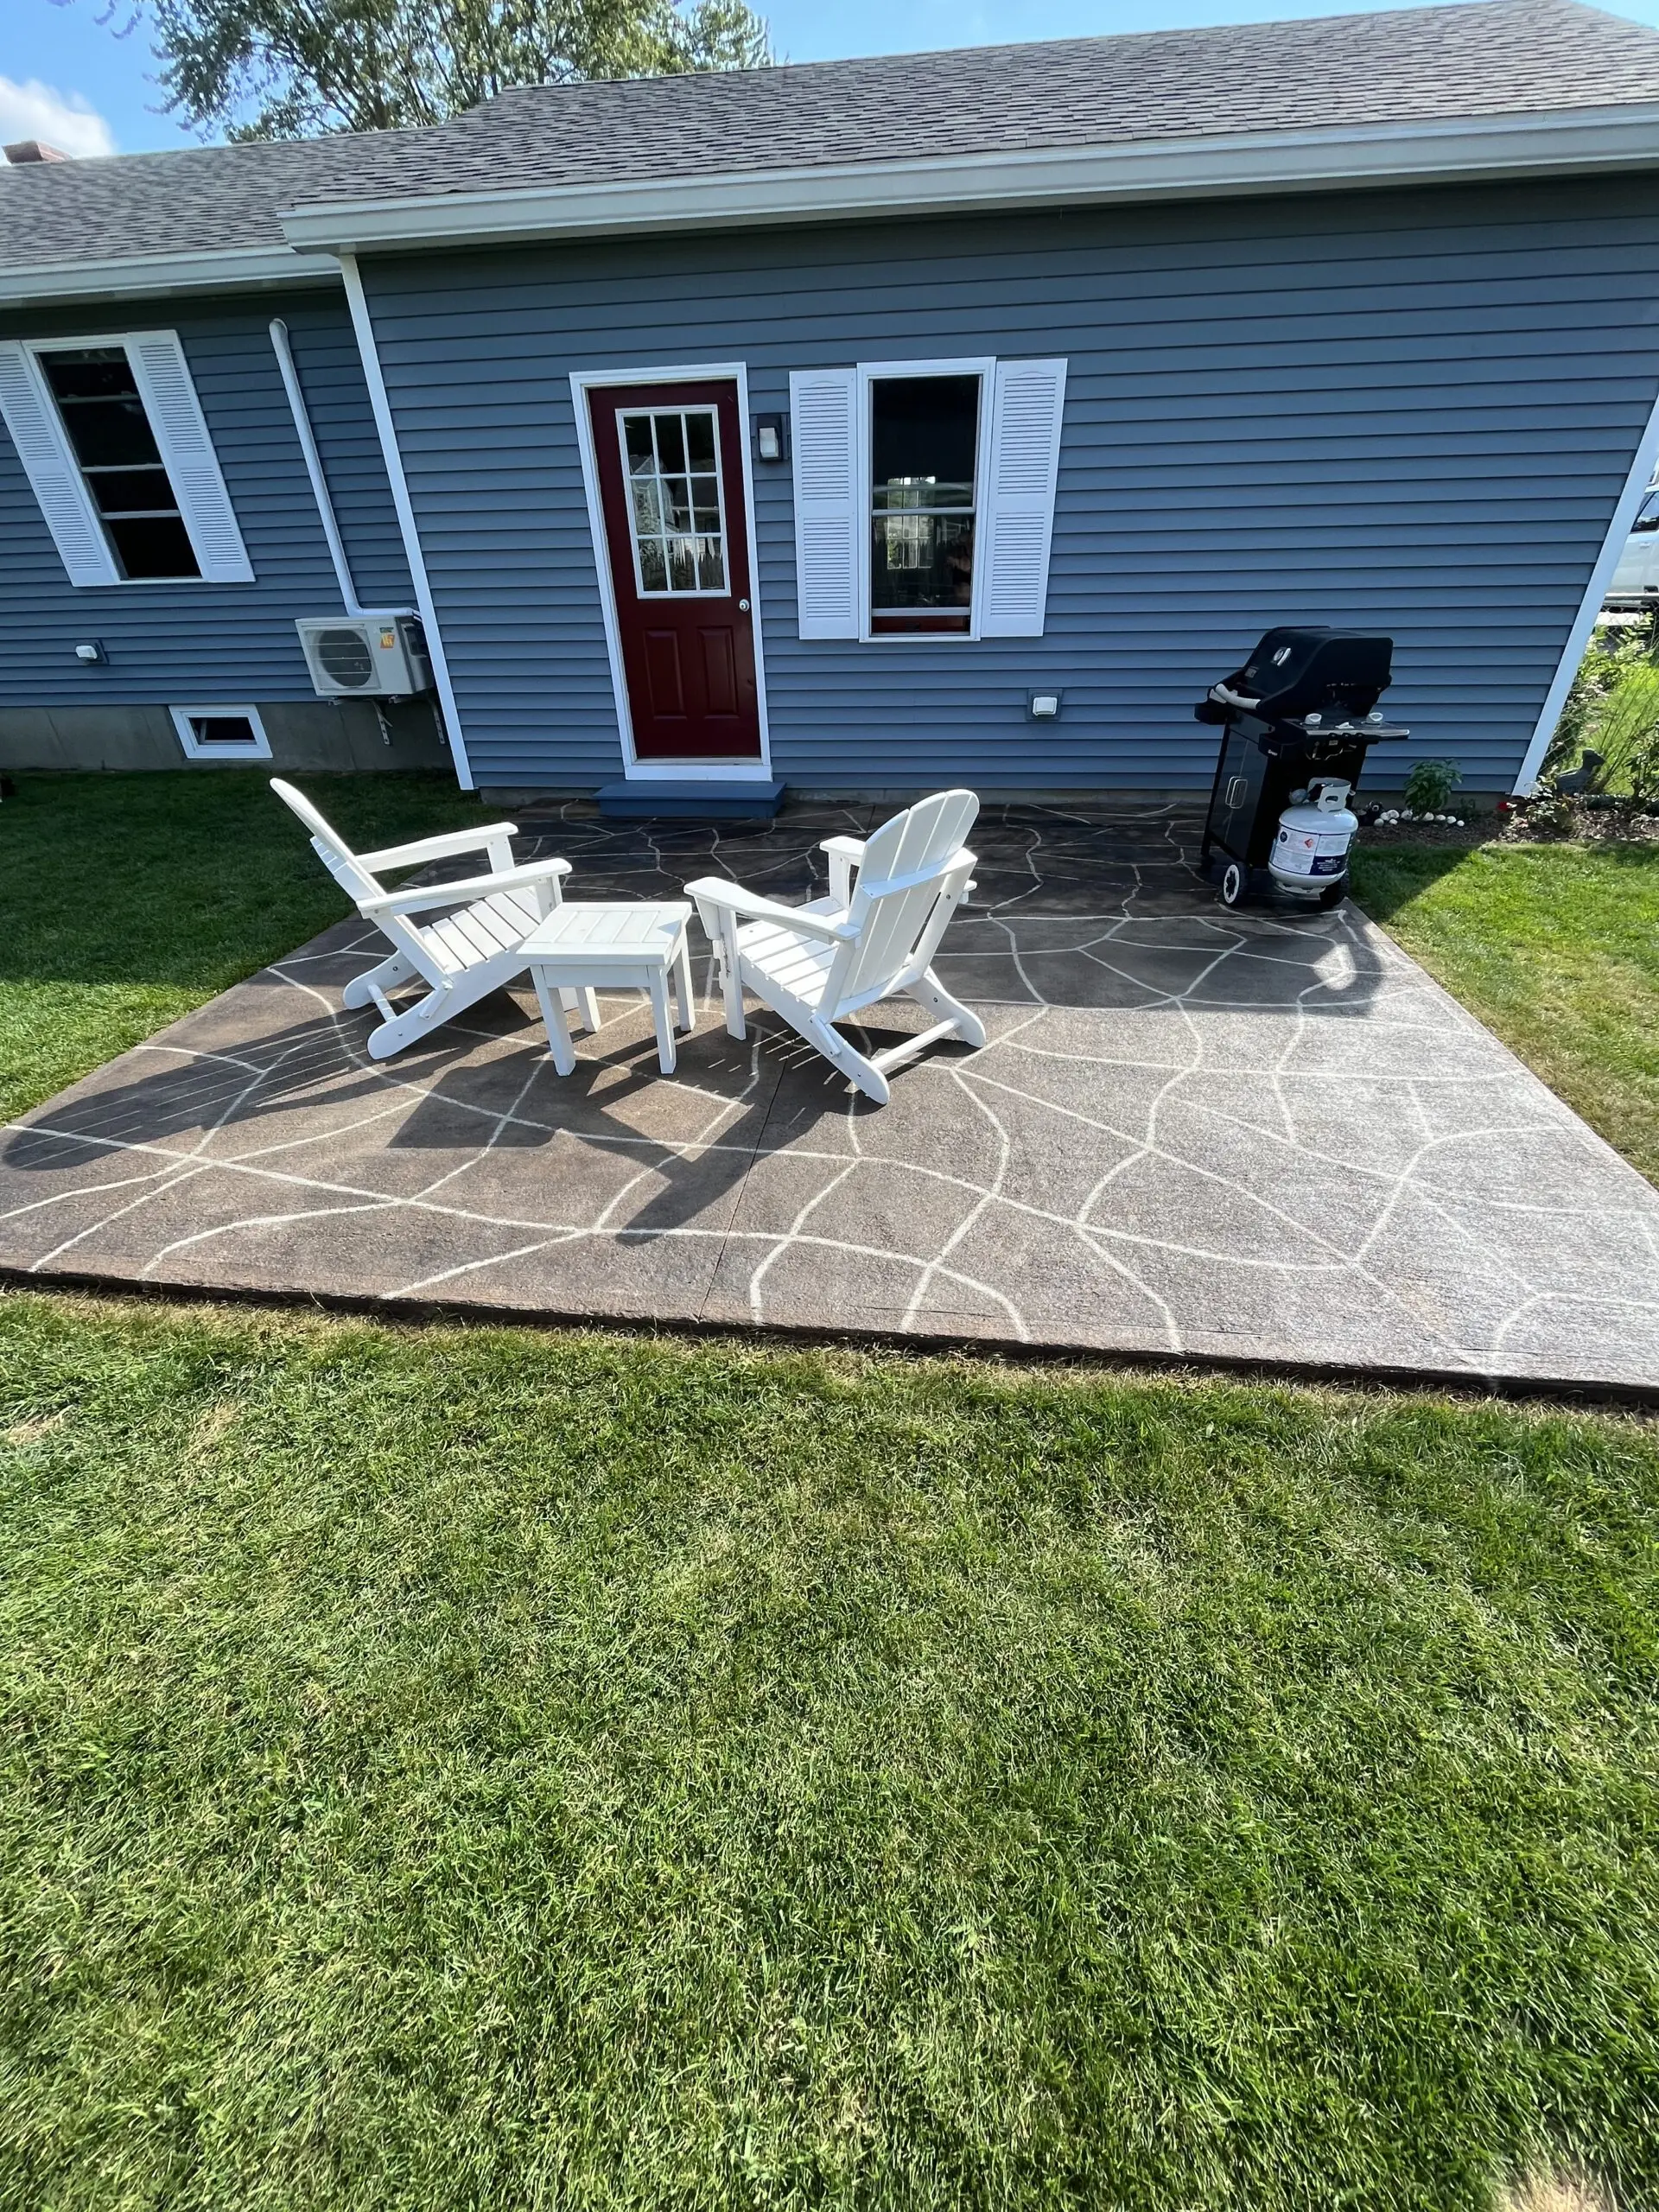 The transformed patio featuring the faux flagstone design, furnished with outdoor chairs and tables